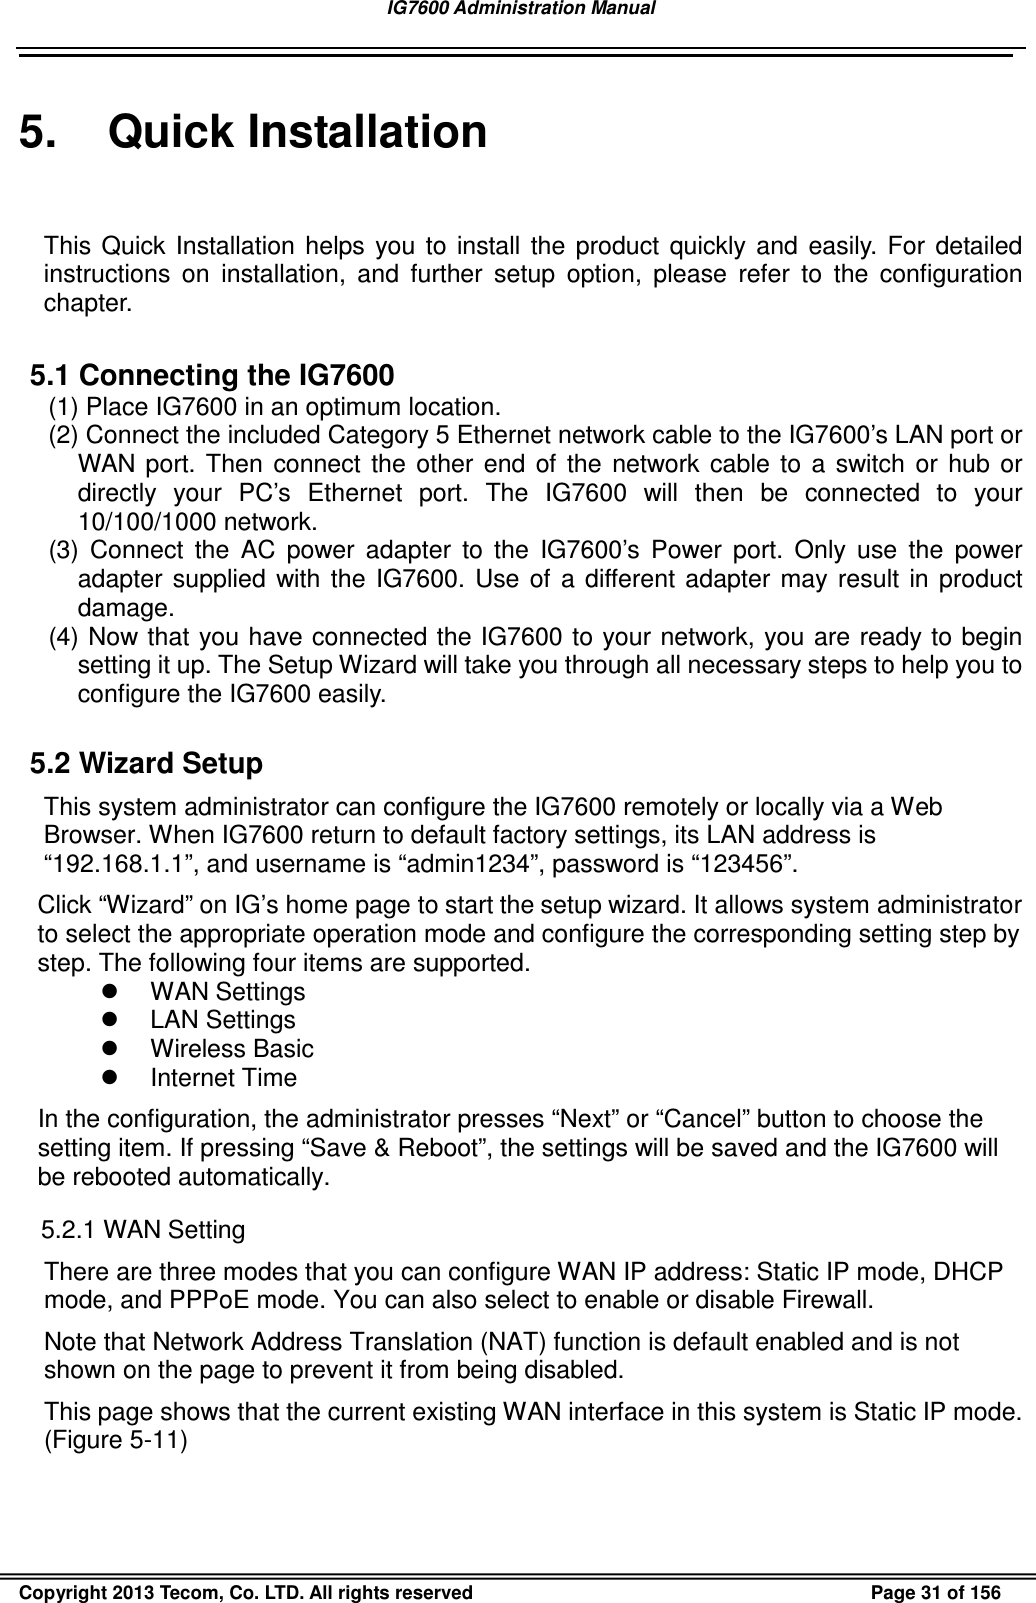 IG7600 Administration Manual                                                                                             Copyright 2013 Tecom, Co. LTD. All rights reserved  Page 31 of 156 5.  Quick Installation This  Quick  Installation  helps  you  to  install  the  product  quickly  and  easily.  For  detailed instructions  on  installation,  and  further  setup  option,  please  refer  to  the  configuration chapter.  5.1 Connecting the IG7600 (1) Place IG7600 in an optimum location.   (2) Connect the included Category 5 Ethernet network cable to the IG7600’s LAN port or WAN  port.  Then  connect  the  other  end  of  the  network  cable  to  a  switch  or  hub  or directly  your  PC’s  Ethernet  port.  The  IG7600  will  then  be  connected  to  your 10/100/1000 network. (3)  Connect  the  AC  power  adapter  to  the  IG7600’s  Power  port.  Only  use  the  power adapter  supplied  with  the  IG7600.  Use  of  a  different adapter  may  result  in  product damage. (4) Now that you have connected the IG7600 to your network, you are ready to begin setting it up. The Setup Wizard will take you through all necessary steps to help you to configure the IG7600 easily.  5.2 Wizard Setup This system administrator can configure the IG7600 remotely or locally via a Web Browser. When IG7600 return to default factory settings, its LAN address is “192.168.1.1”, and username is “admin1234”, password is “123456”. Click “Wizard” on IG’s home page to start the setup wizard. It allows system administrator to select the appropriate operation mode and configure the corresponding setting step by step. The following four items are supported.   WAN Settings   LAN Settings   Wireless Basic   Internet Time In the configuration, the administrator presses “Next” or “Cancel” button to choose the setting item. If pressing “Save &amp; Reboot”, the settings will be saved and the IG7600 will be rebooted automatically. 5.2.1 WAN Setting There are three modes that you can configure WAN IP address: Static IP mode, DHCP mode, and PPPoE mode. You can also select to enable or disable Firewall. Note that Network Address Translation (NAT) function is default enabled and is not shown on the page to prevent it from being disabled. This page shows that the current existing WAN interface in this system is Static IP mode. (Figure 5-11) 